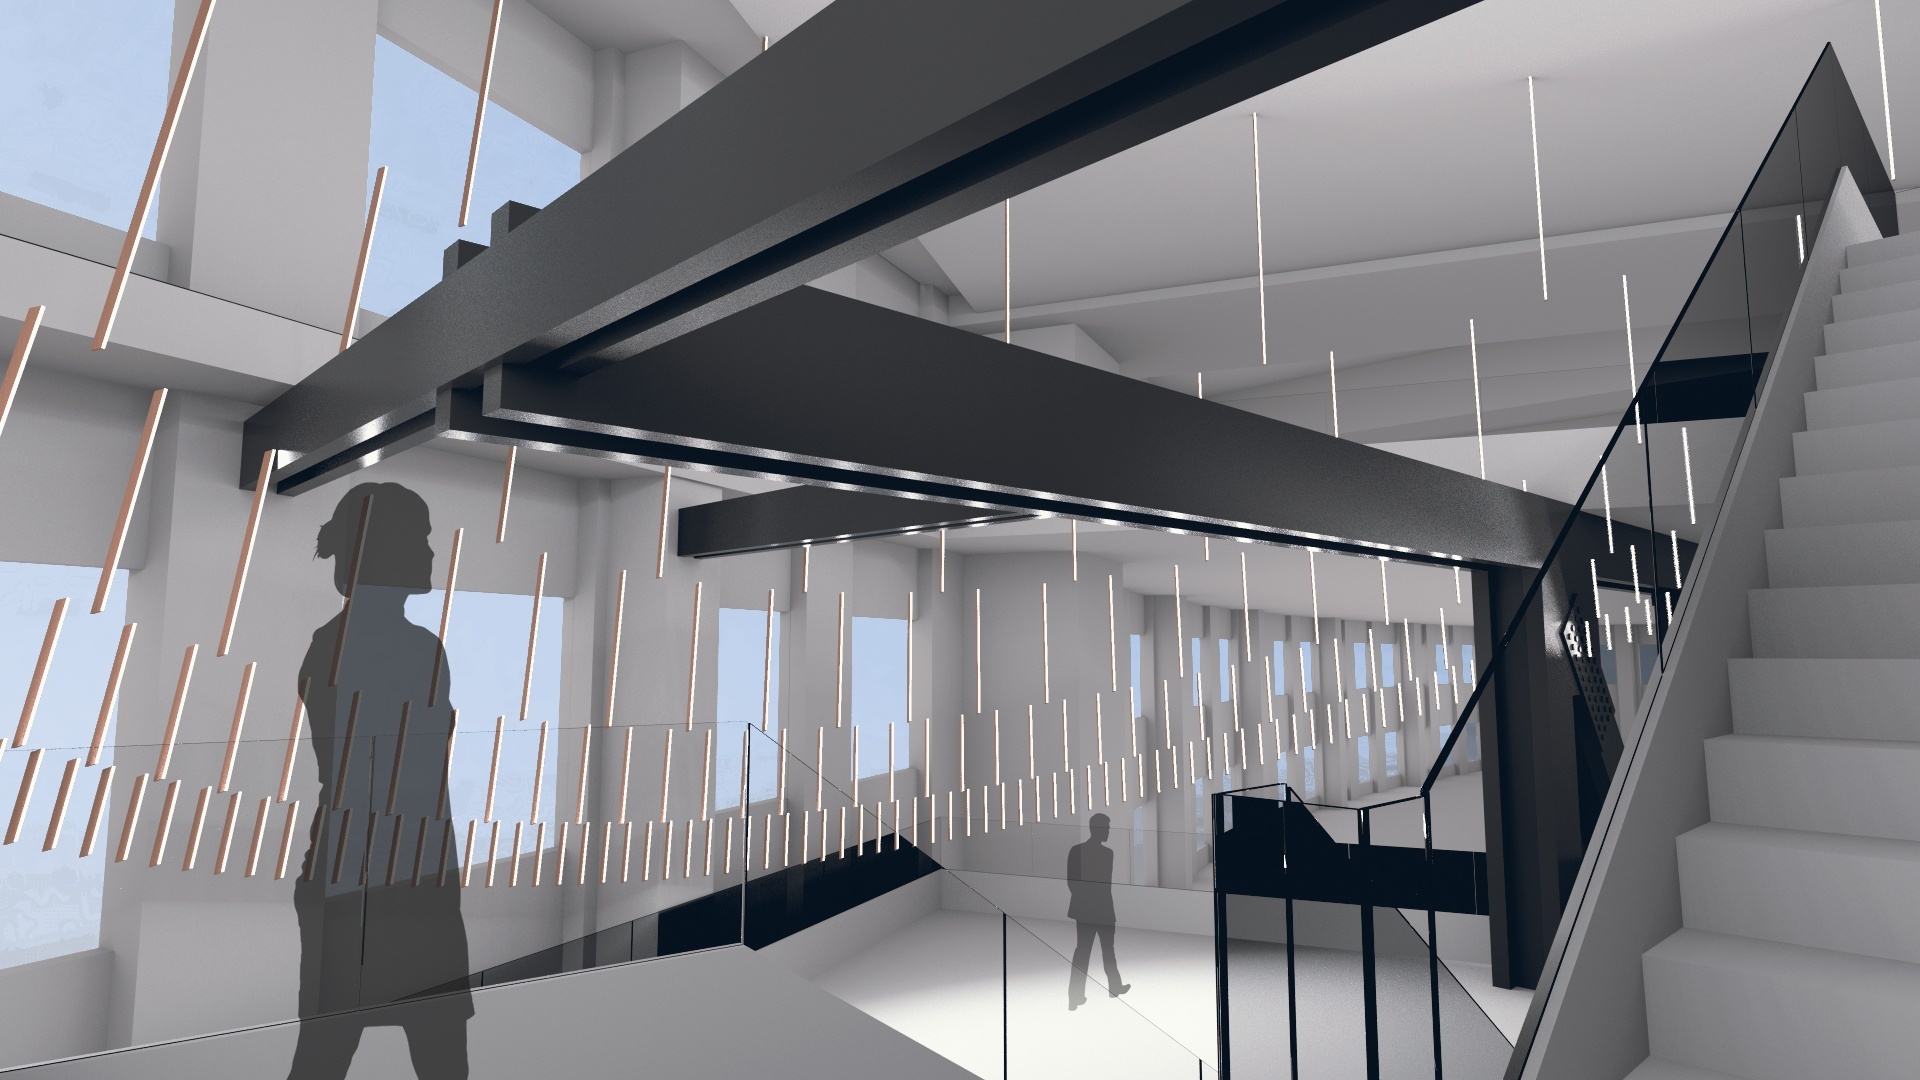 Render of final design with interactive sculptural installation suspended in the space